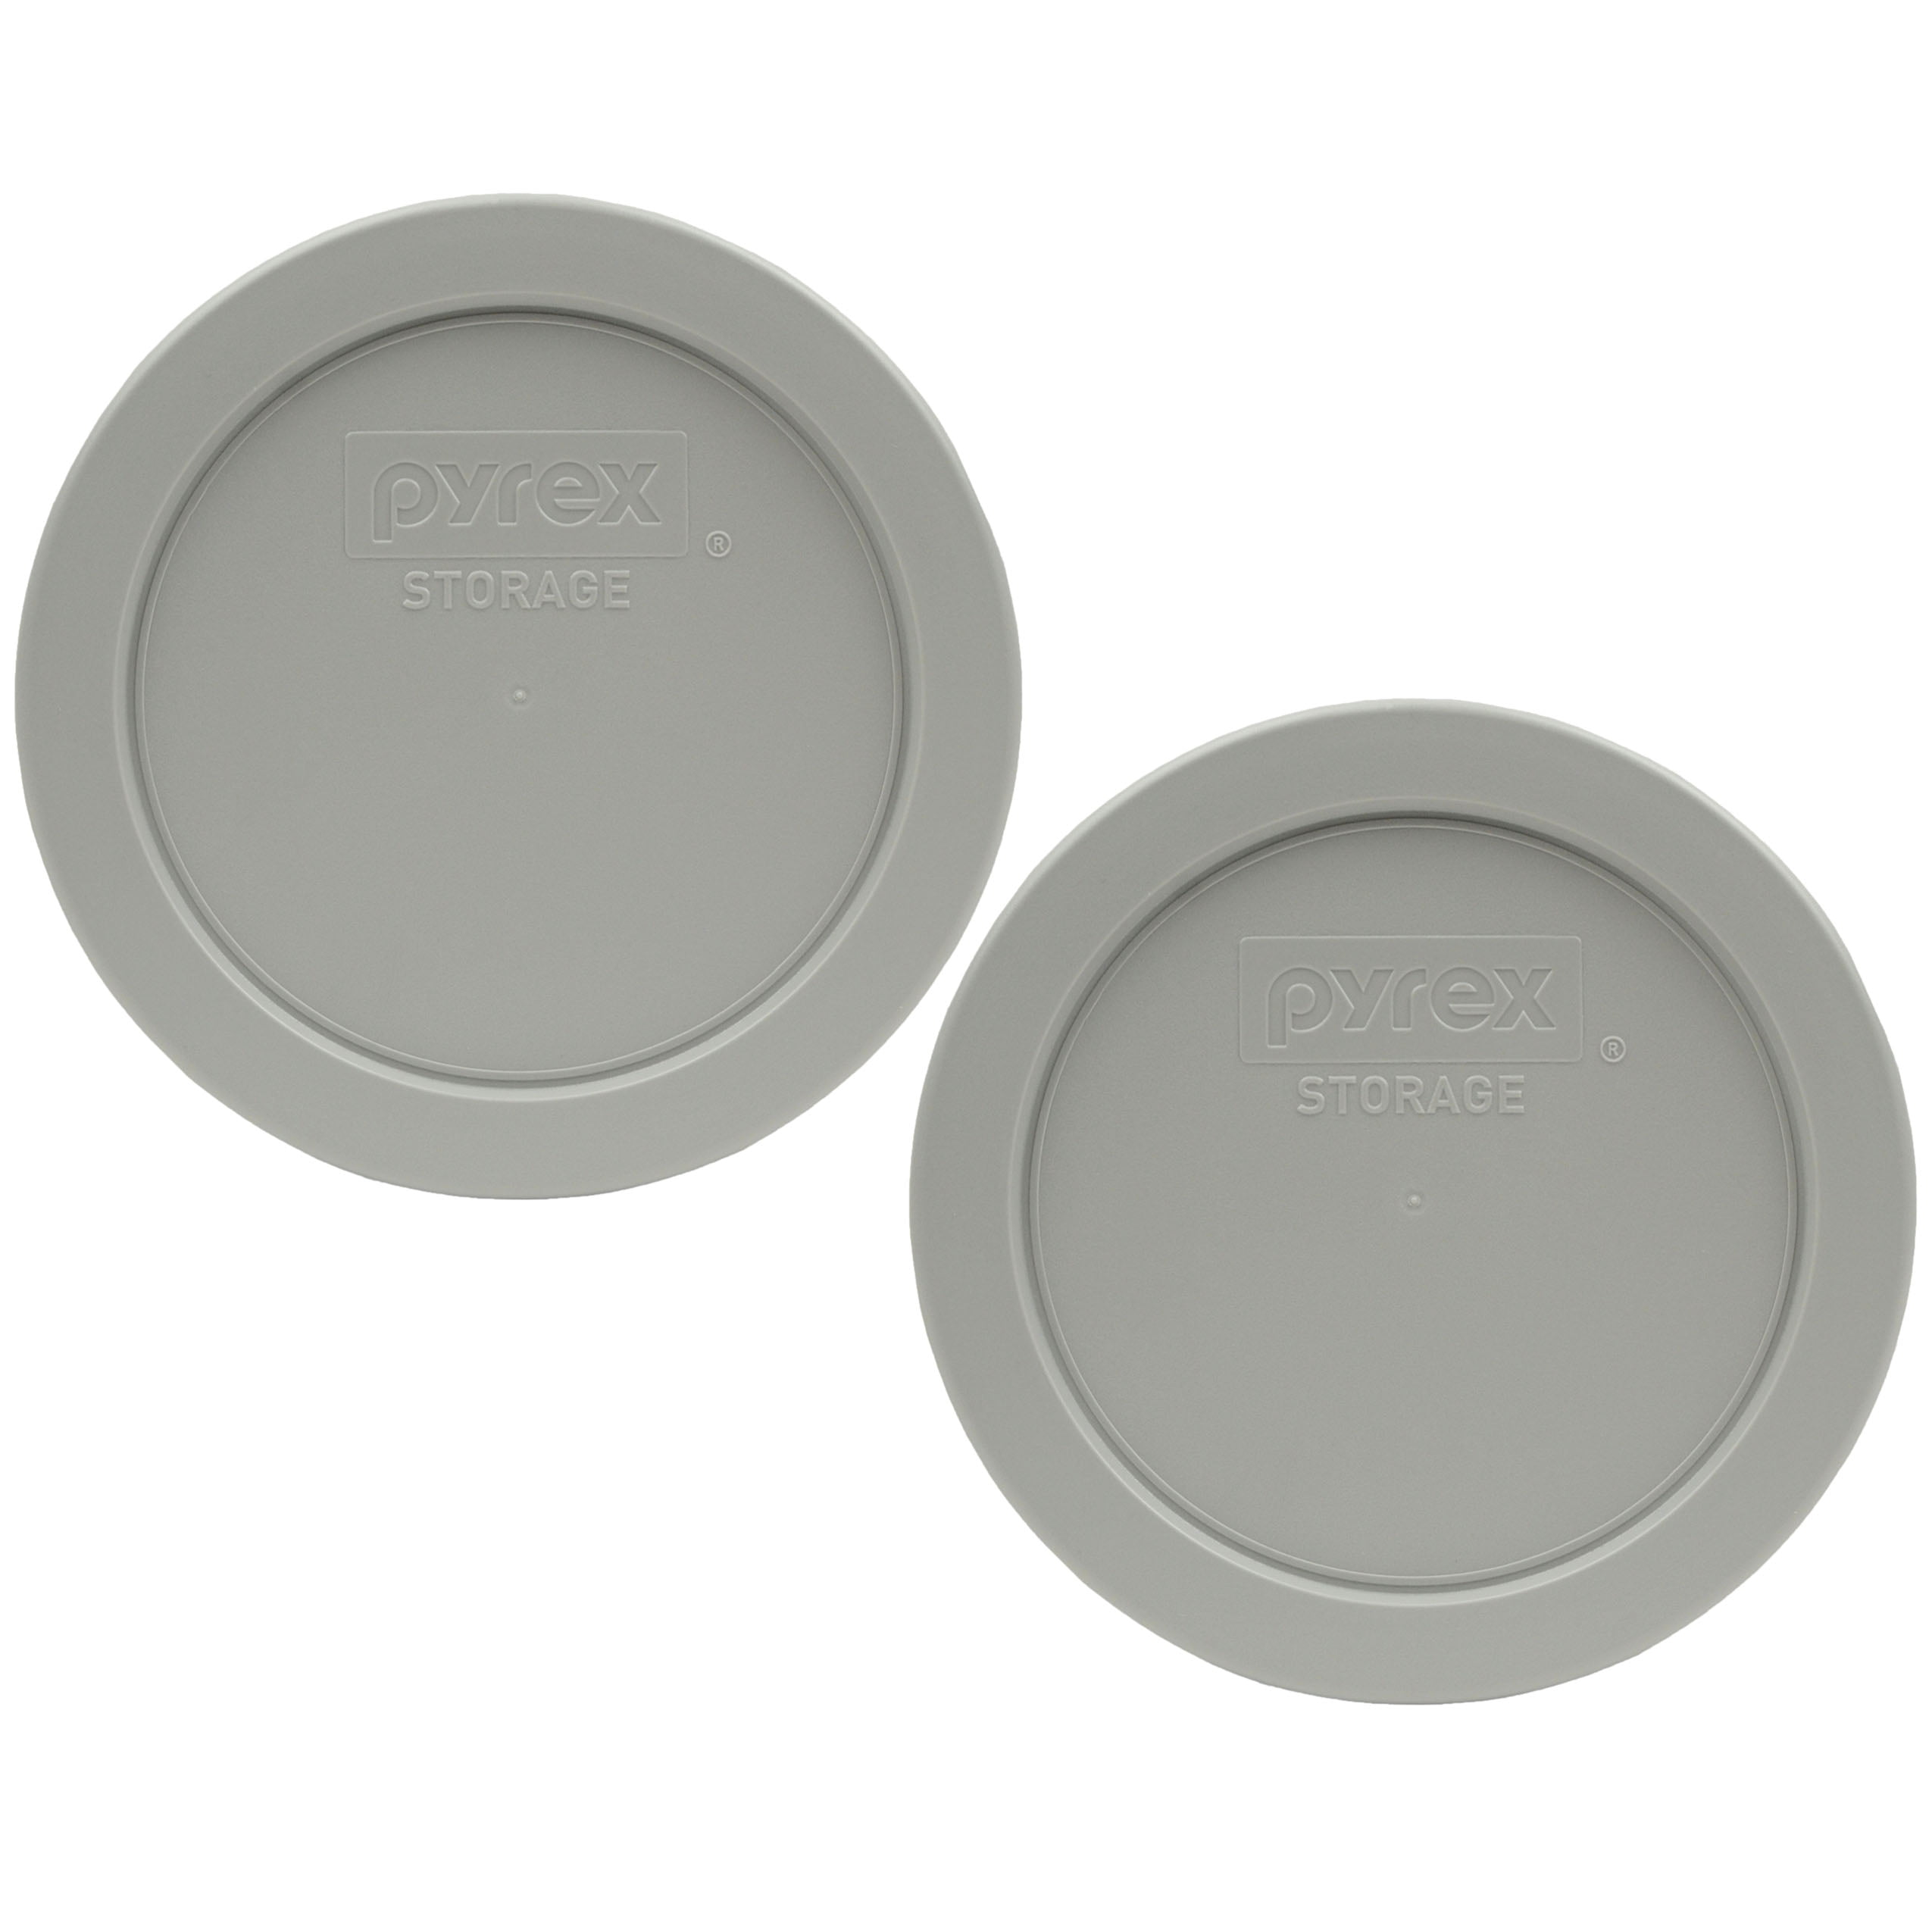 Pyrex 7200-PC Sleek Silver Round Plastic Storage Replacement Lid Cover 6-Pack 